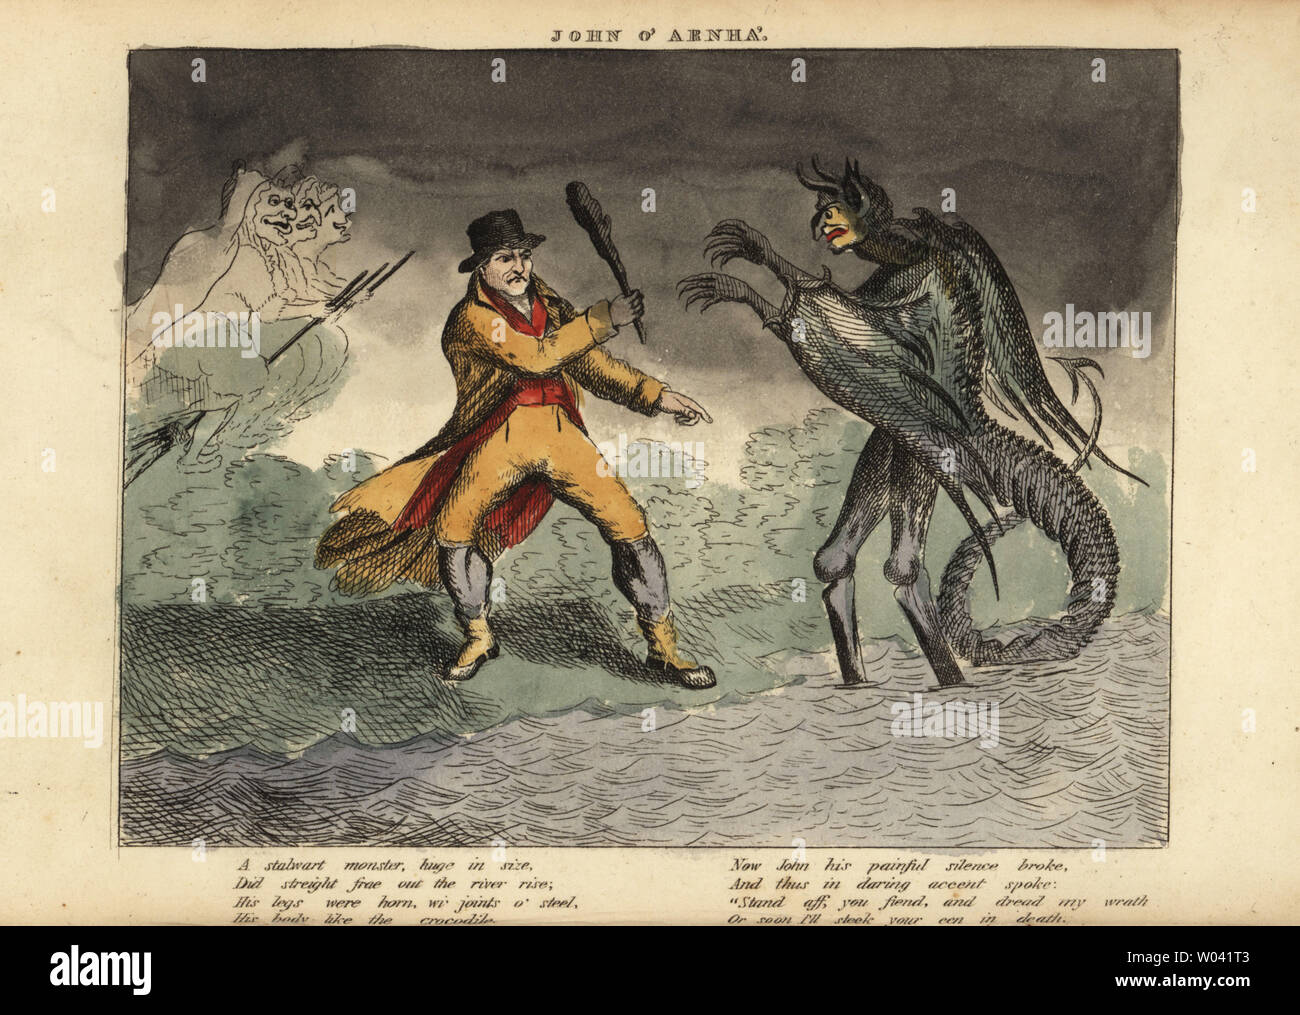 Scottish traveller John o’ Arnha fighting a Kelpy or monster with a cudgel. Three witches flying on broomsticks. A stalwart monster, huge in size, Did streight frae out the river rise, His legs were horn, wi joints o' steel, This body like a crocodile...Handcoloured copperplate engraving from George Beattie’s John o’ Arnha, Montrose, Scotland, 1826. Stock Photo